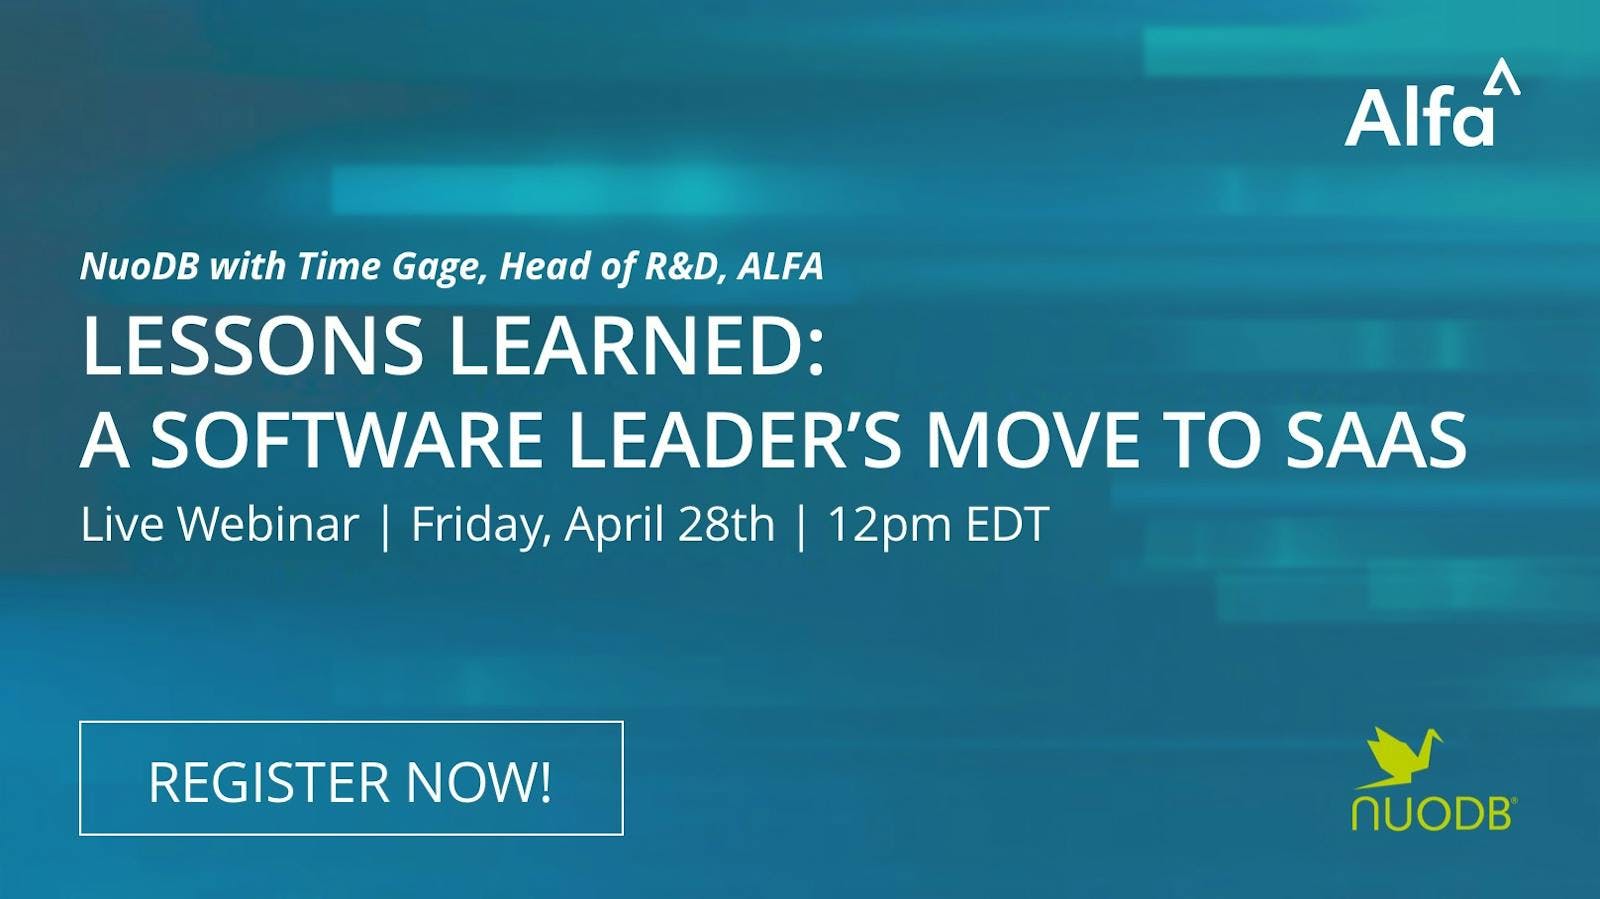 Lessons Learned: A Software Leader's Move to SAAS Live Webinar on Friday April 28th at 12pm EDT